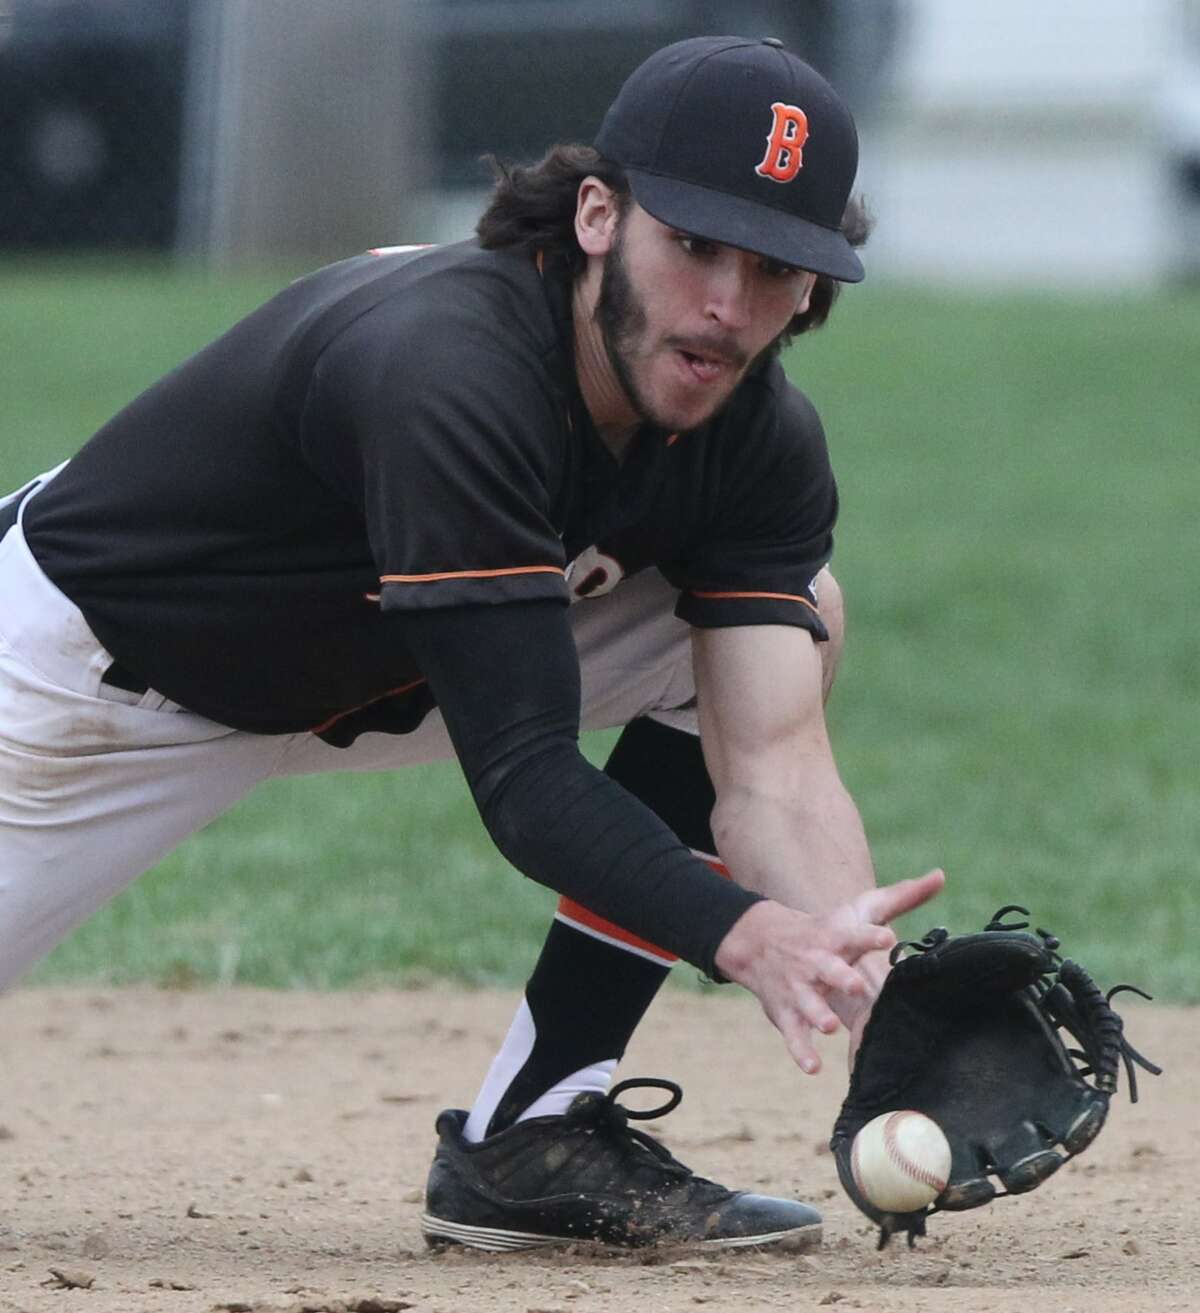 Beardstown second baseman Owen Quigley tracks down a ground ball for the final out of Friday's game.